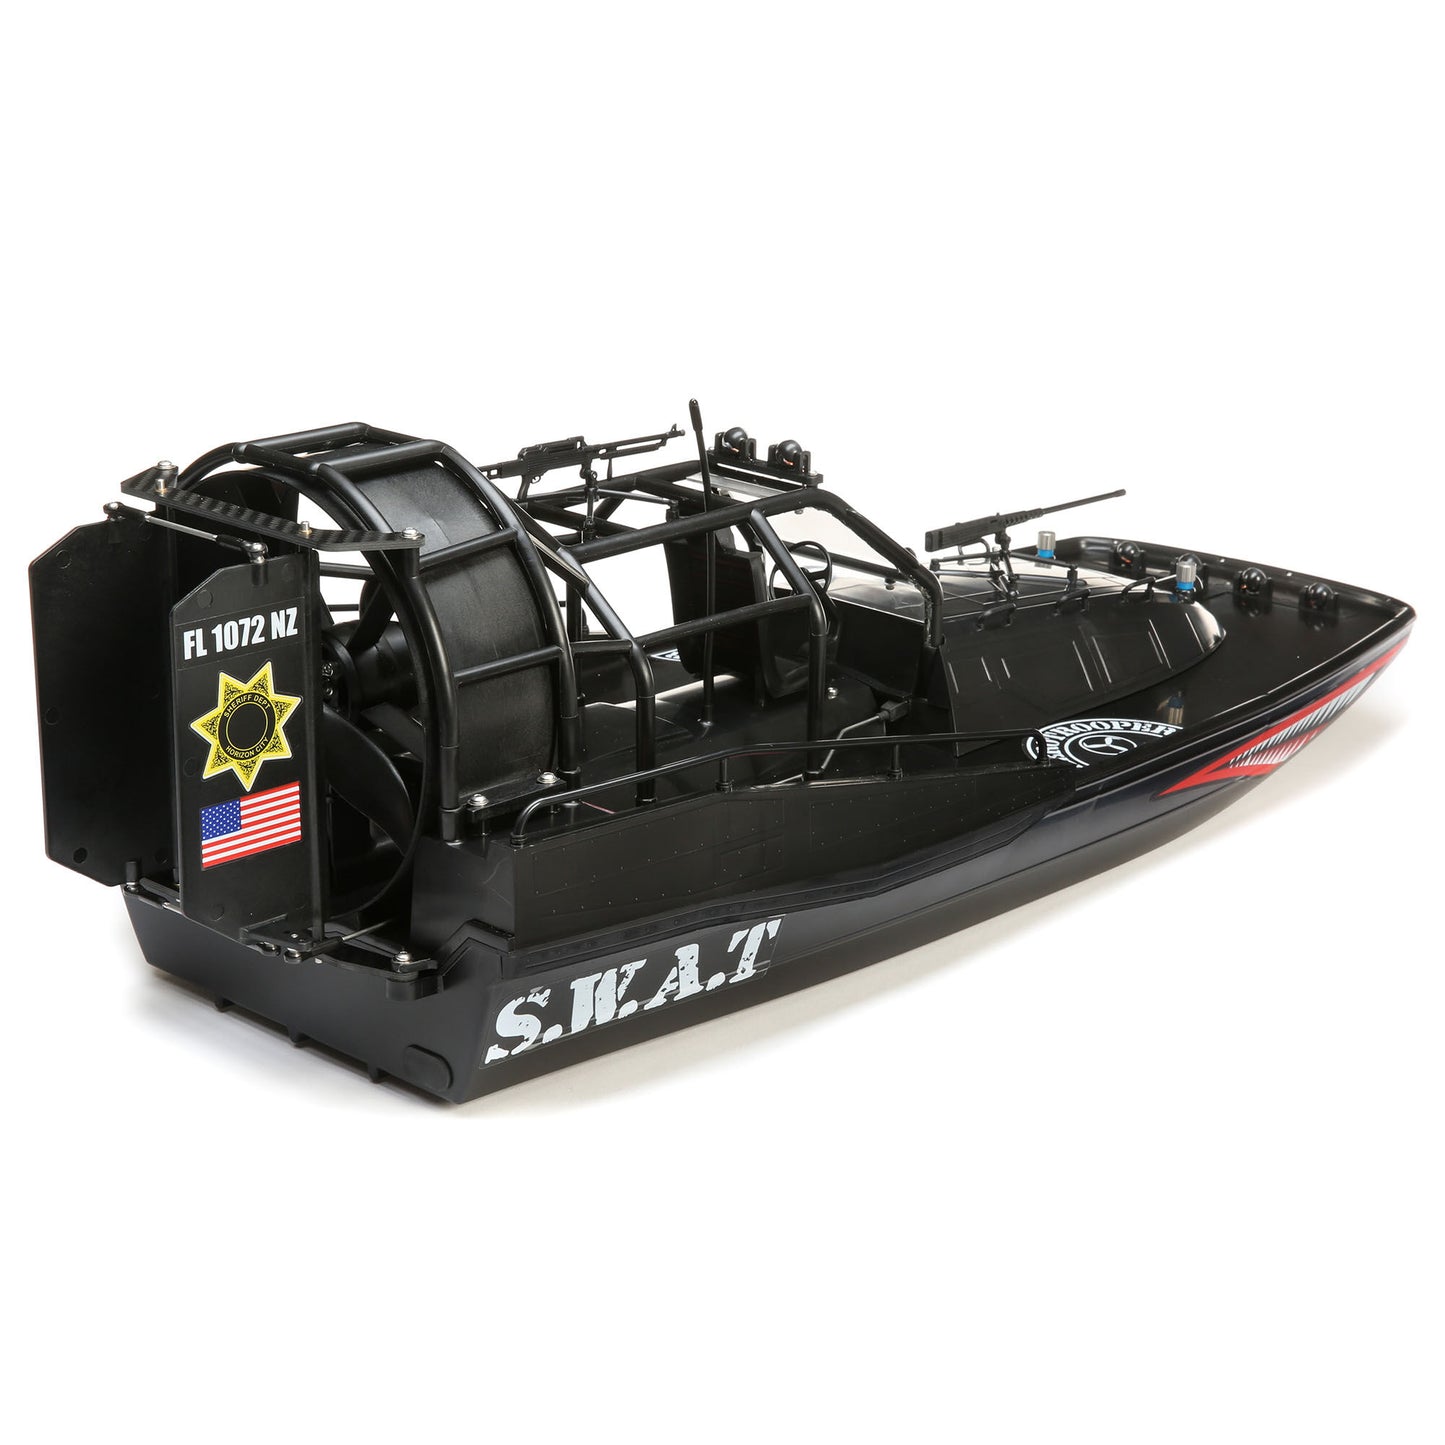 Aerotrooper 25-inch Brushless Air Boat: RTR